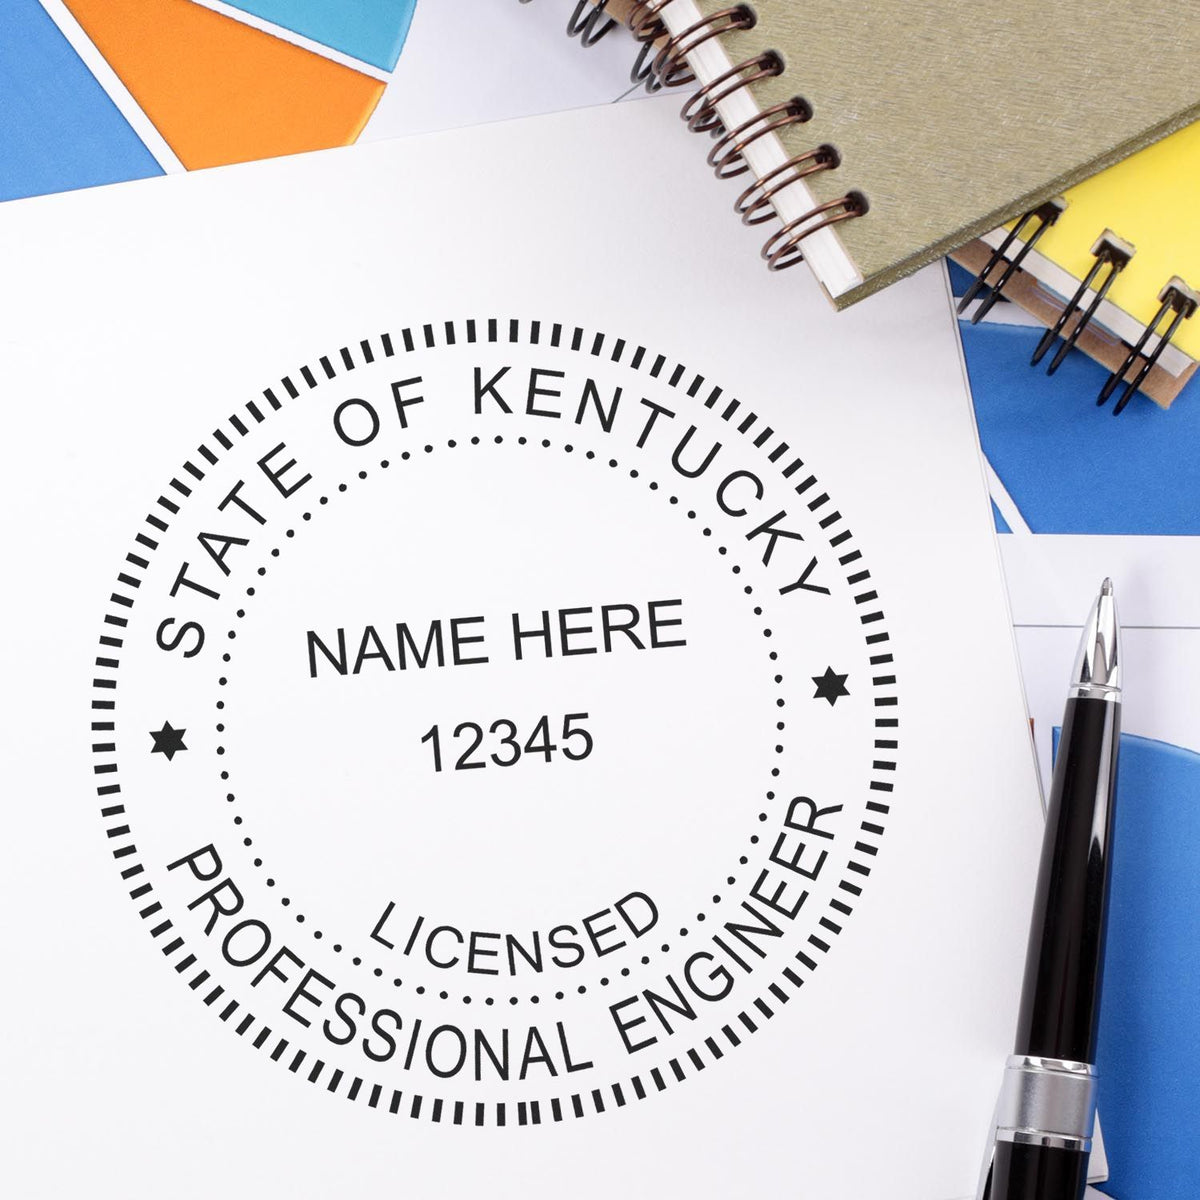 This paper is stamped with a sample imprint of the Kentucky Professional Engineer Seal Stamp, signifying its quality and reliability.